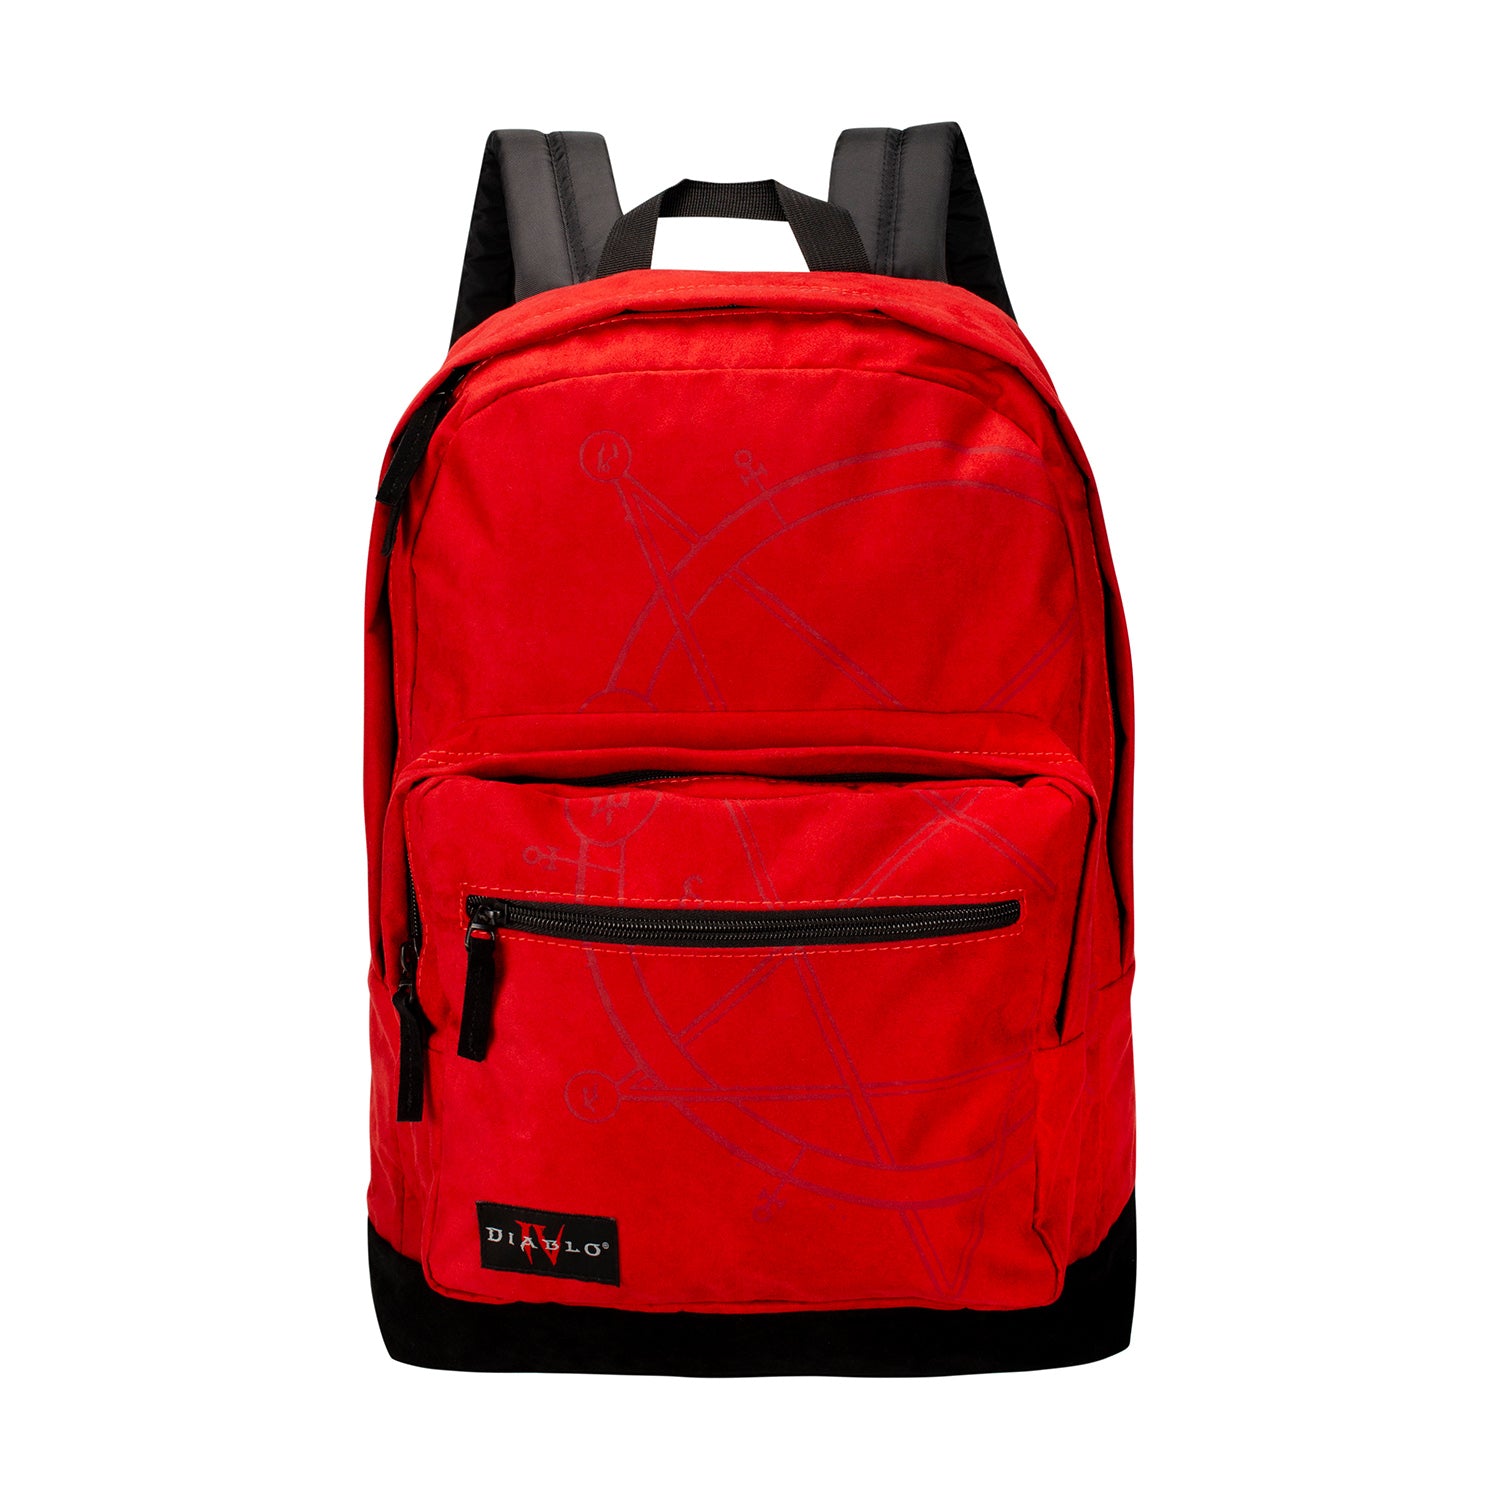 Diablo IV Red Backpack - Front View